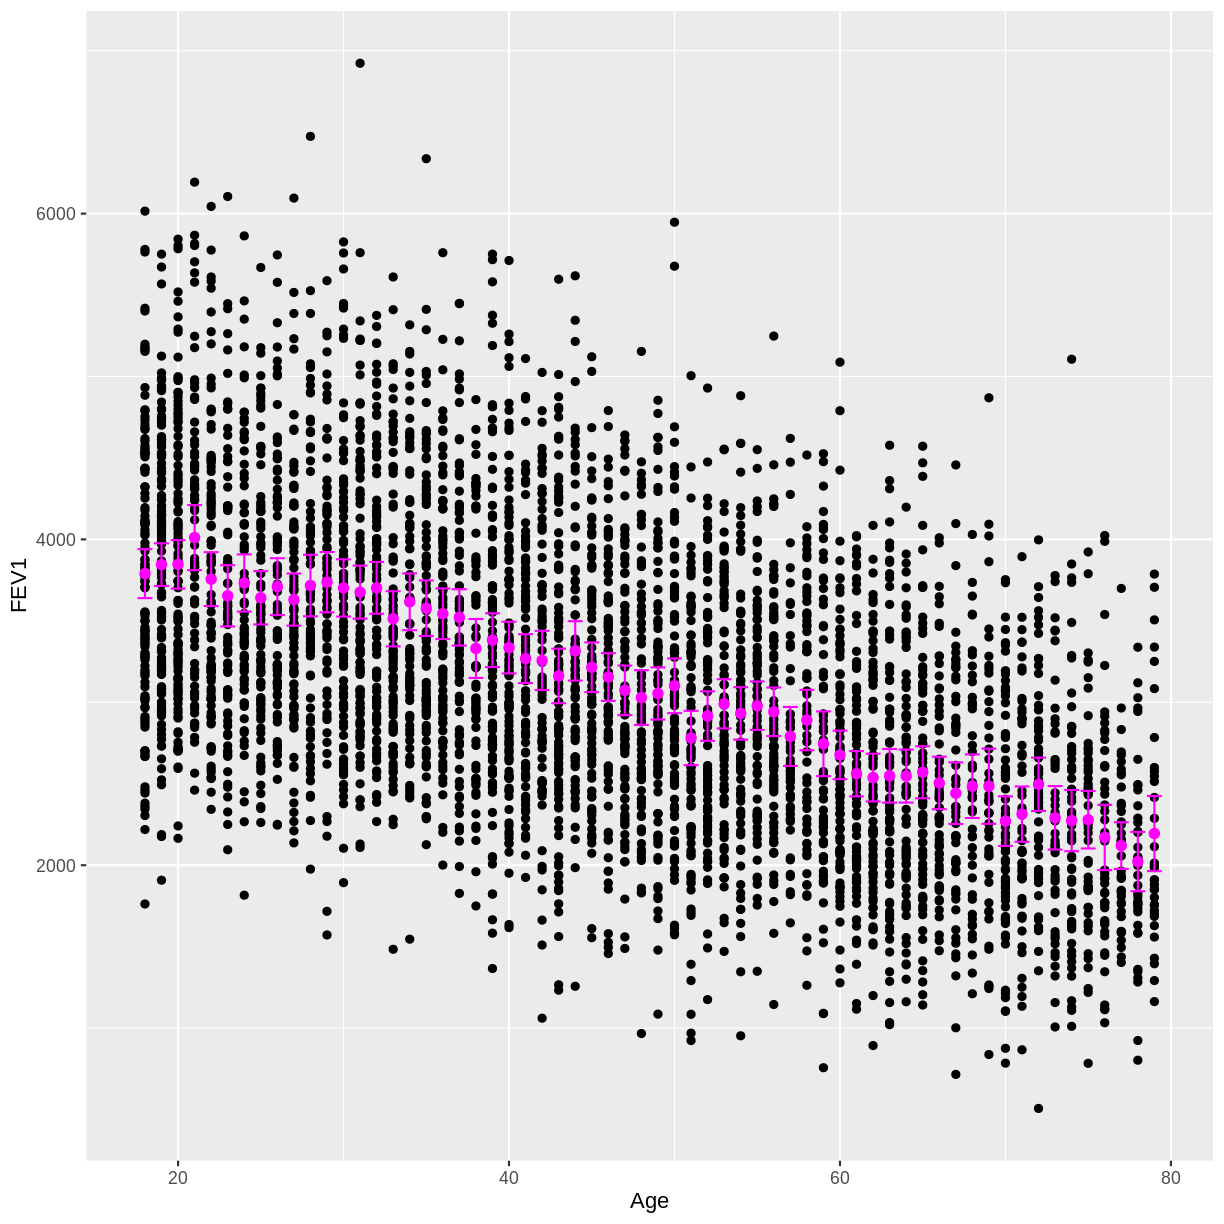 plot of chunk FEV1 age scatterplot with means